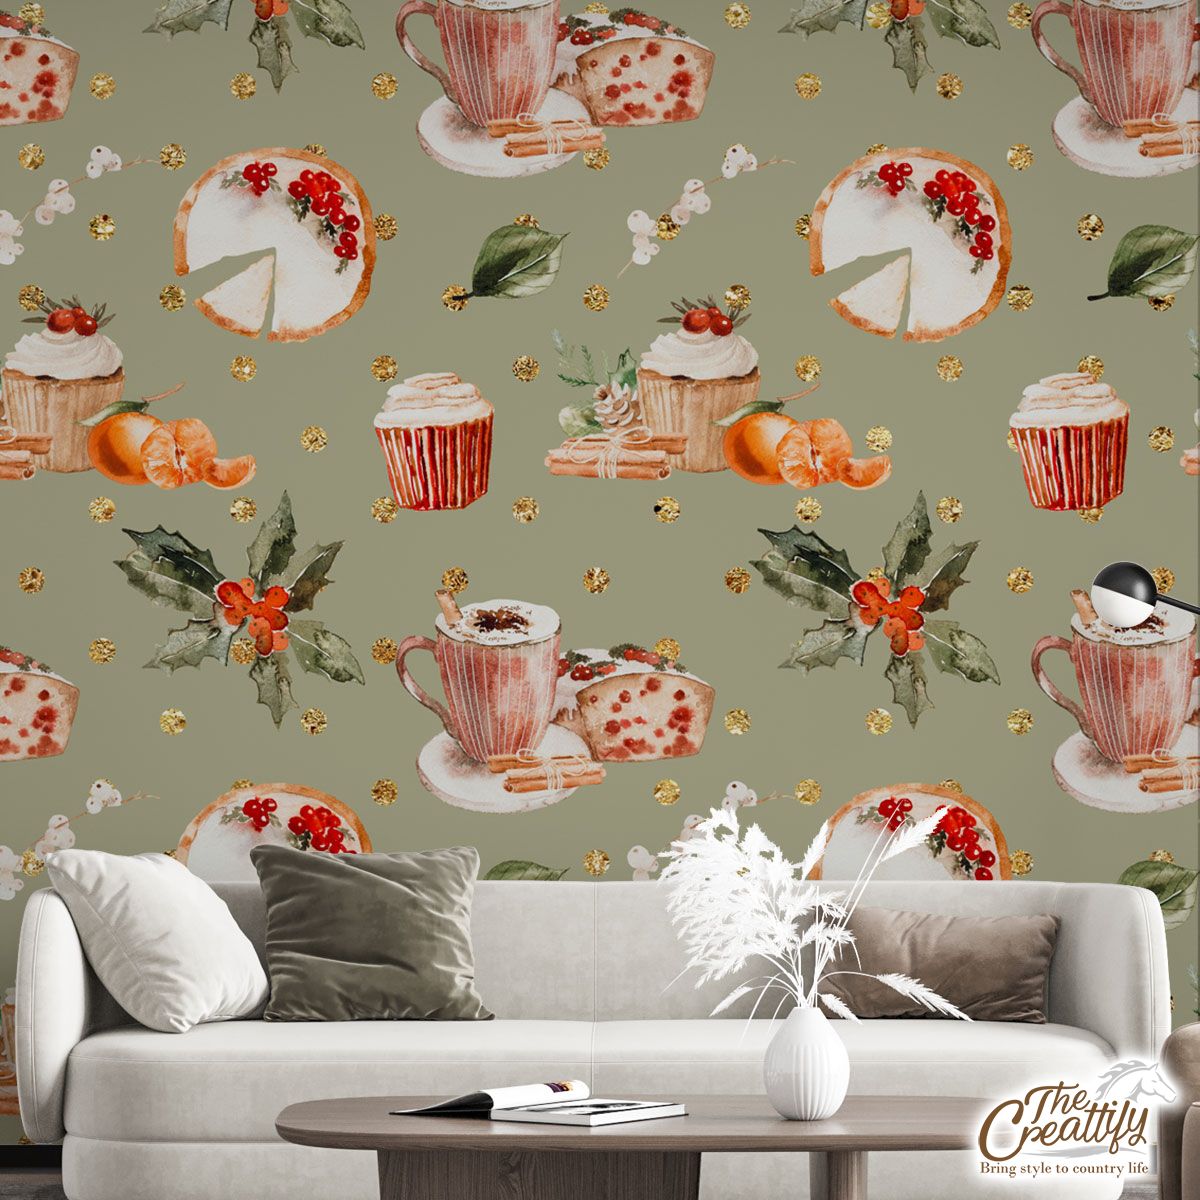 Christmas Cupcakes, Hot Cocoa, Cinnamon, Orange And Holly Leaves Seamless Pattern Wall Mural